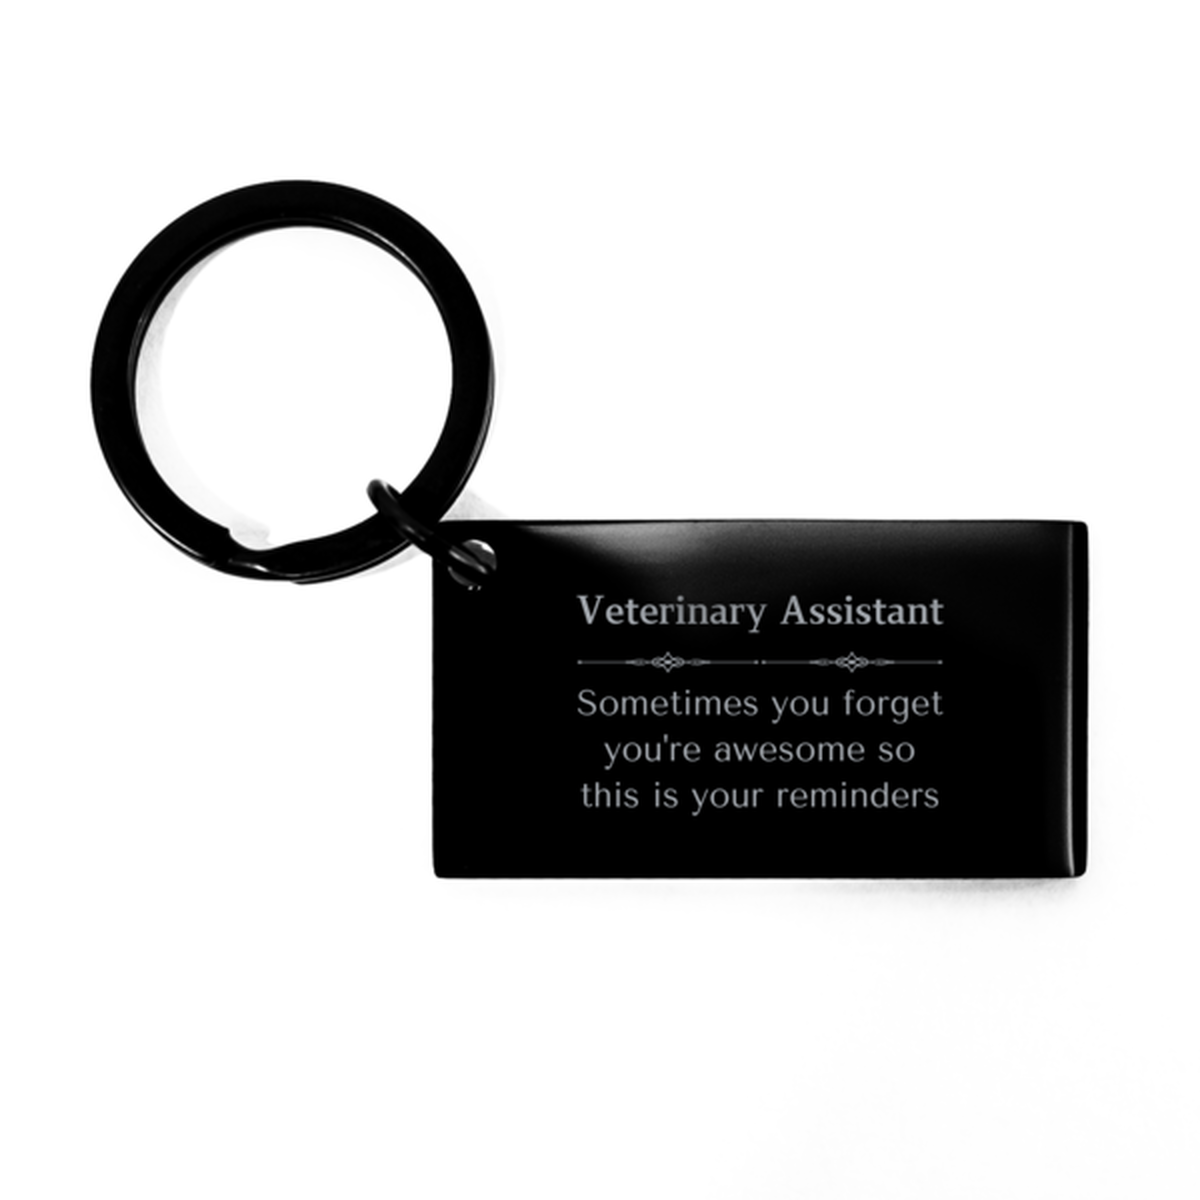 Sentimental Veterinary Assistant Keychain, Aircraft Mechanic Sometimes you forget you're awesome so this is your reminders, Graduation Christmas Birthday Gifts for Veterinary Assistant, Men, Women, Coworkers